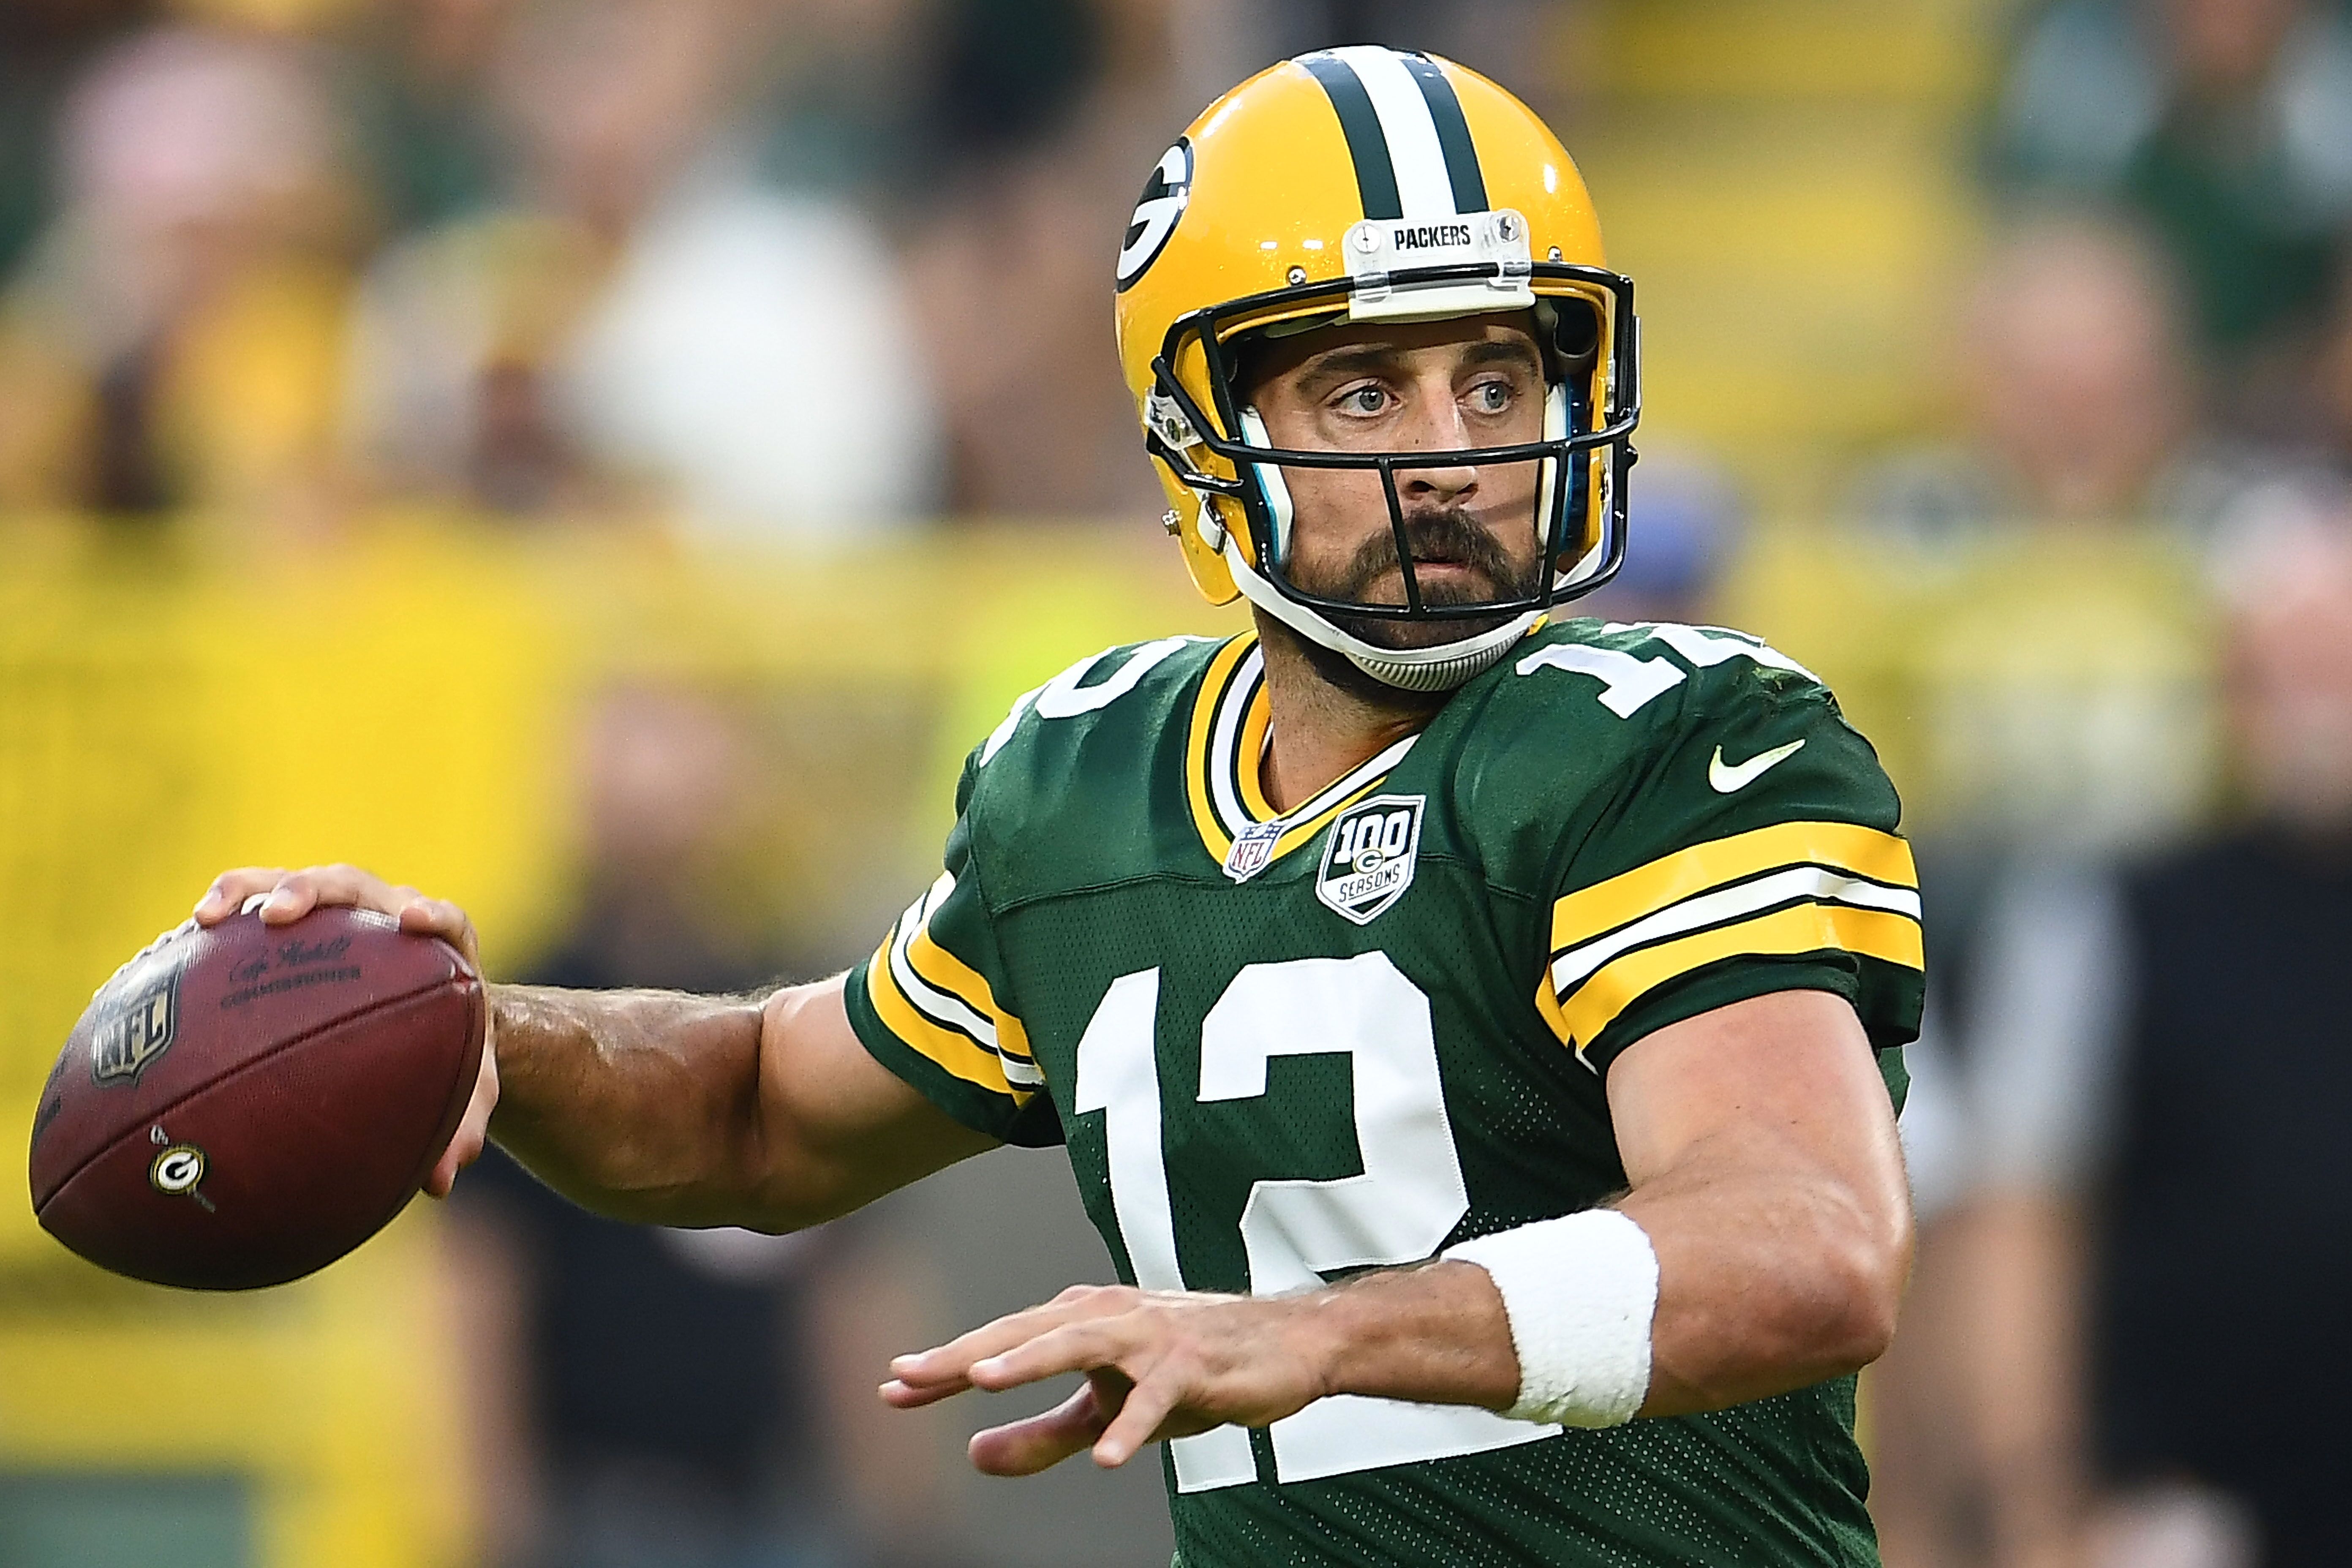 Aaron Rodgers #12 of the Green Bay Packers drops back to pass during a preseason game against the Pittsburgh Steelers at Lambeau Field on August 16, 2018. | Photo: Getty Images